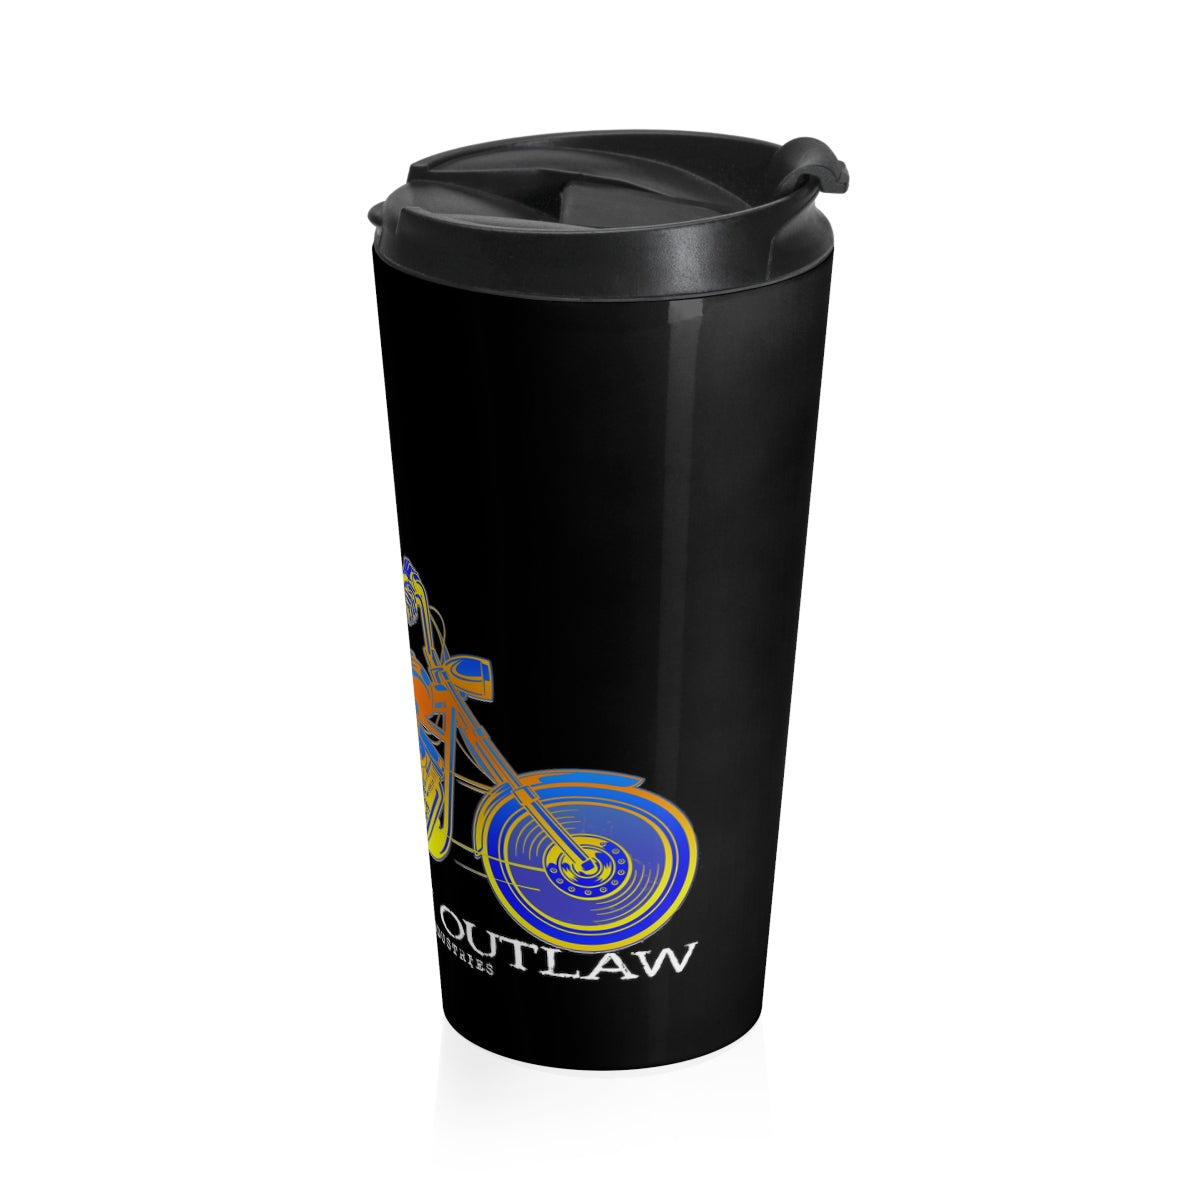 American Outlaw/Stainless Steel Travel Mug